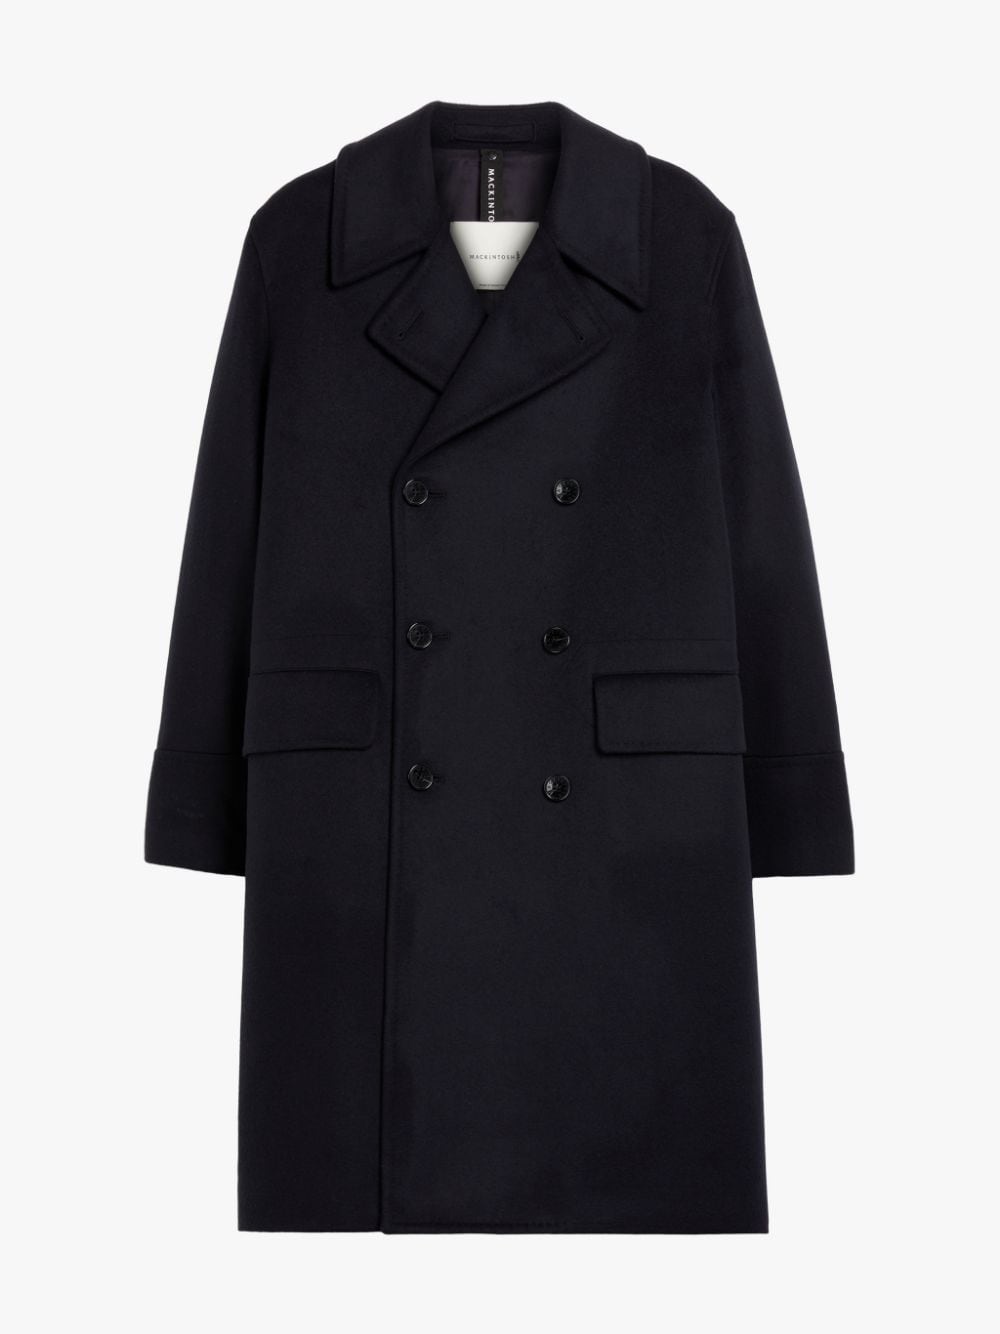 REDFORD NAVY WOOL & CASHMERE DOUBLE BREASTED COAT | GM-1101 - 1